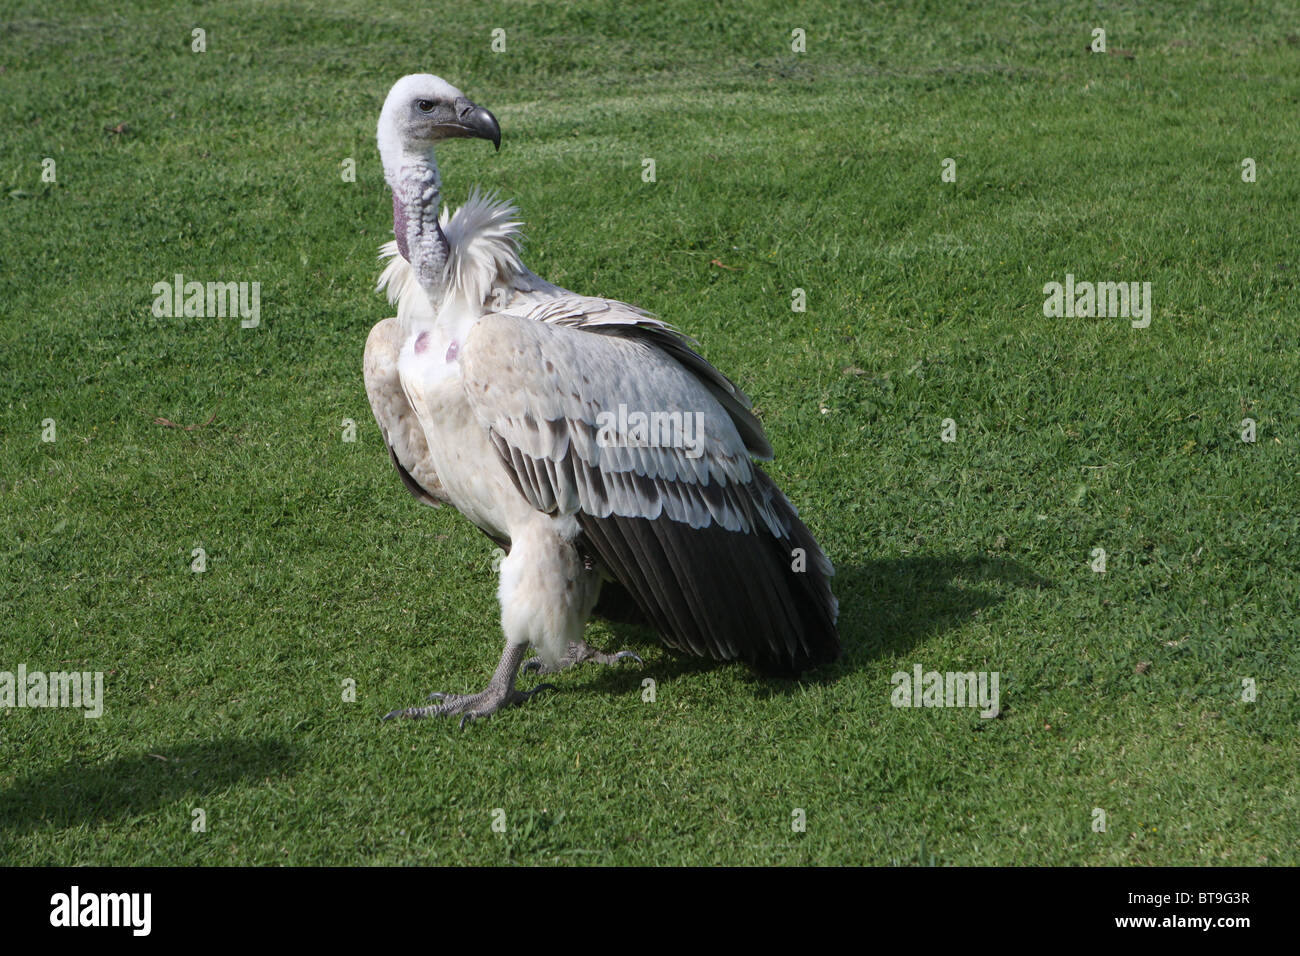 vulture, south Africa, young, bird Stock Photo